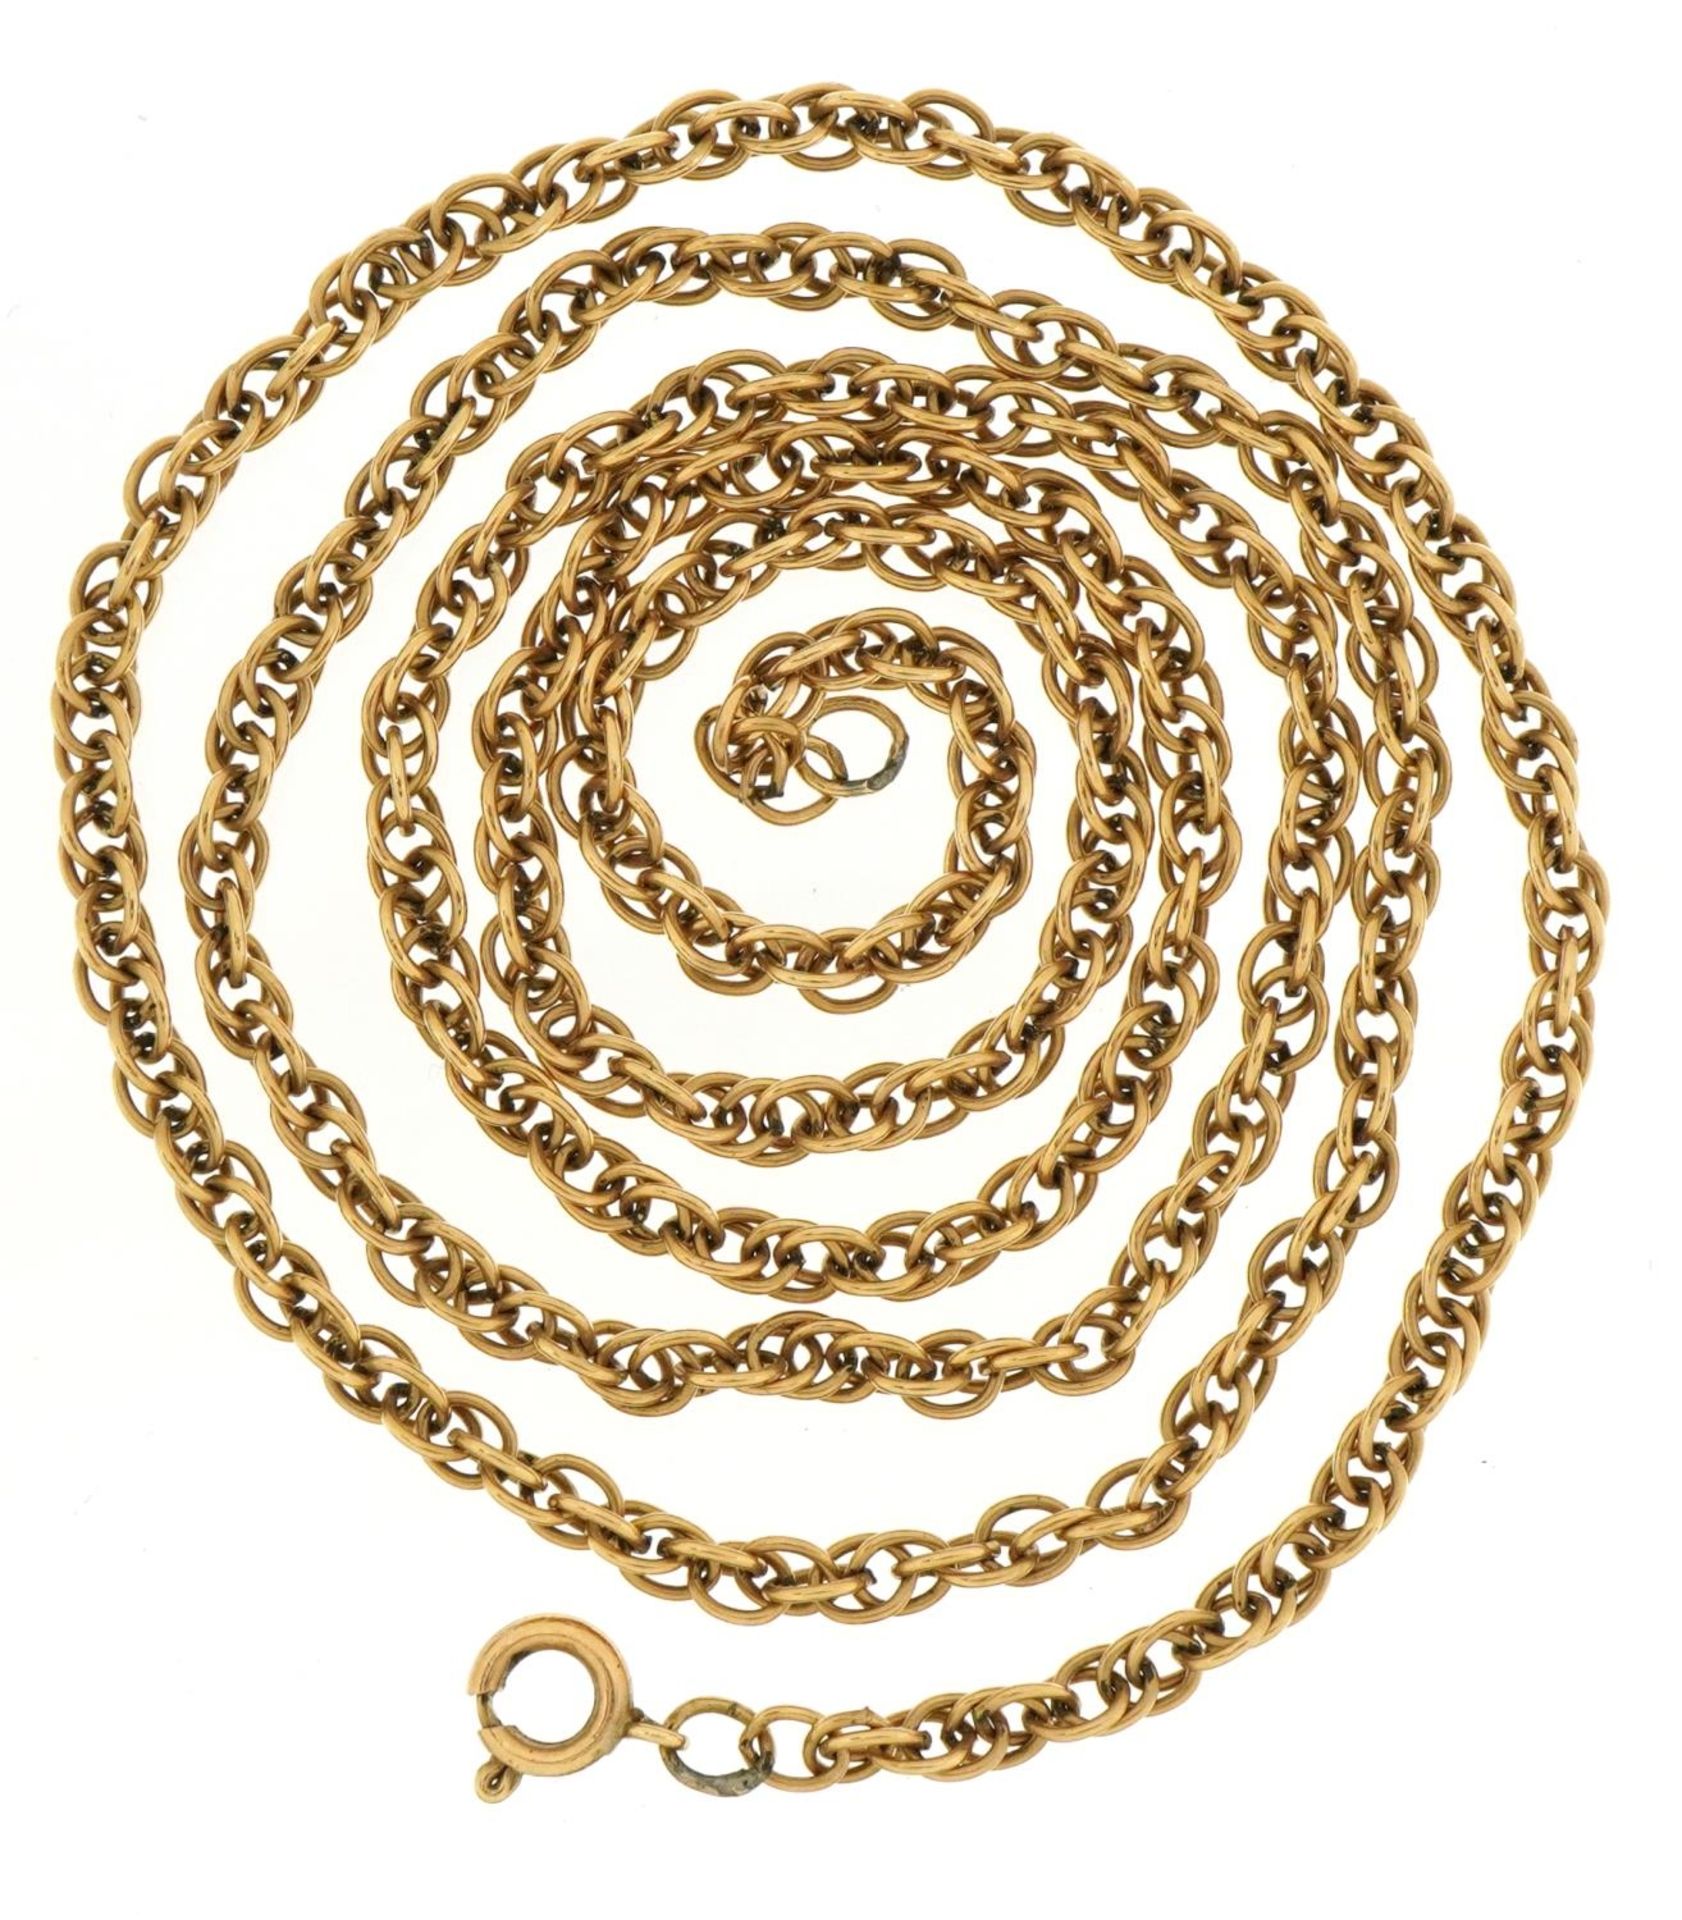 9ct gold chain link necklace, 63cm in length, 12.4g - Image 2 of 2